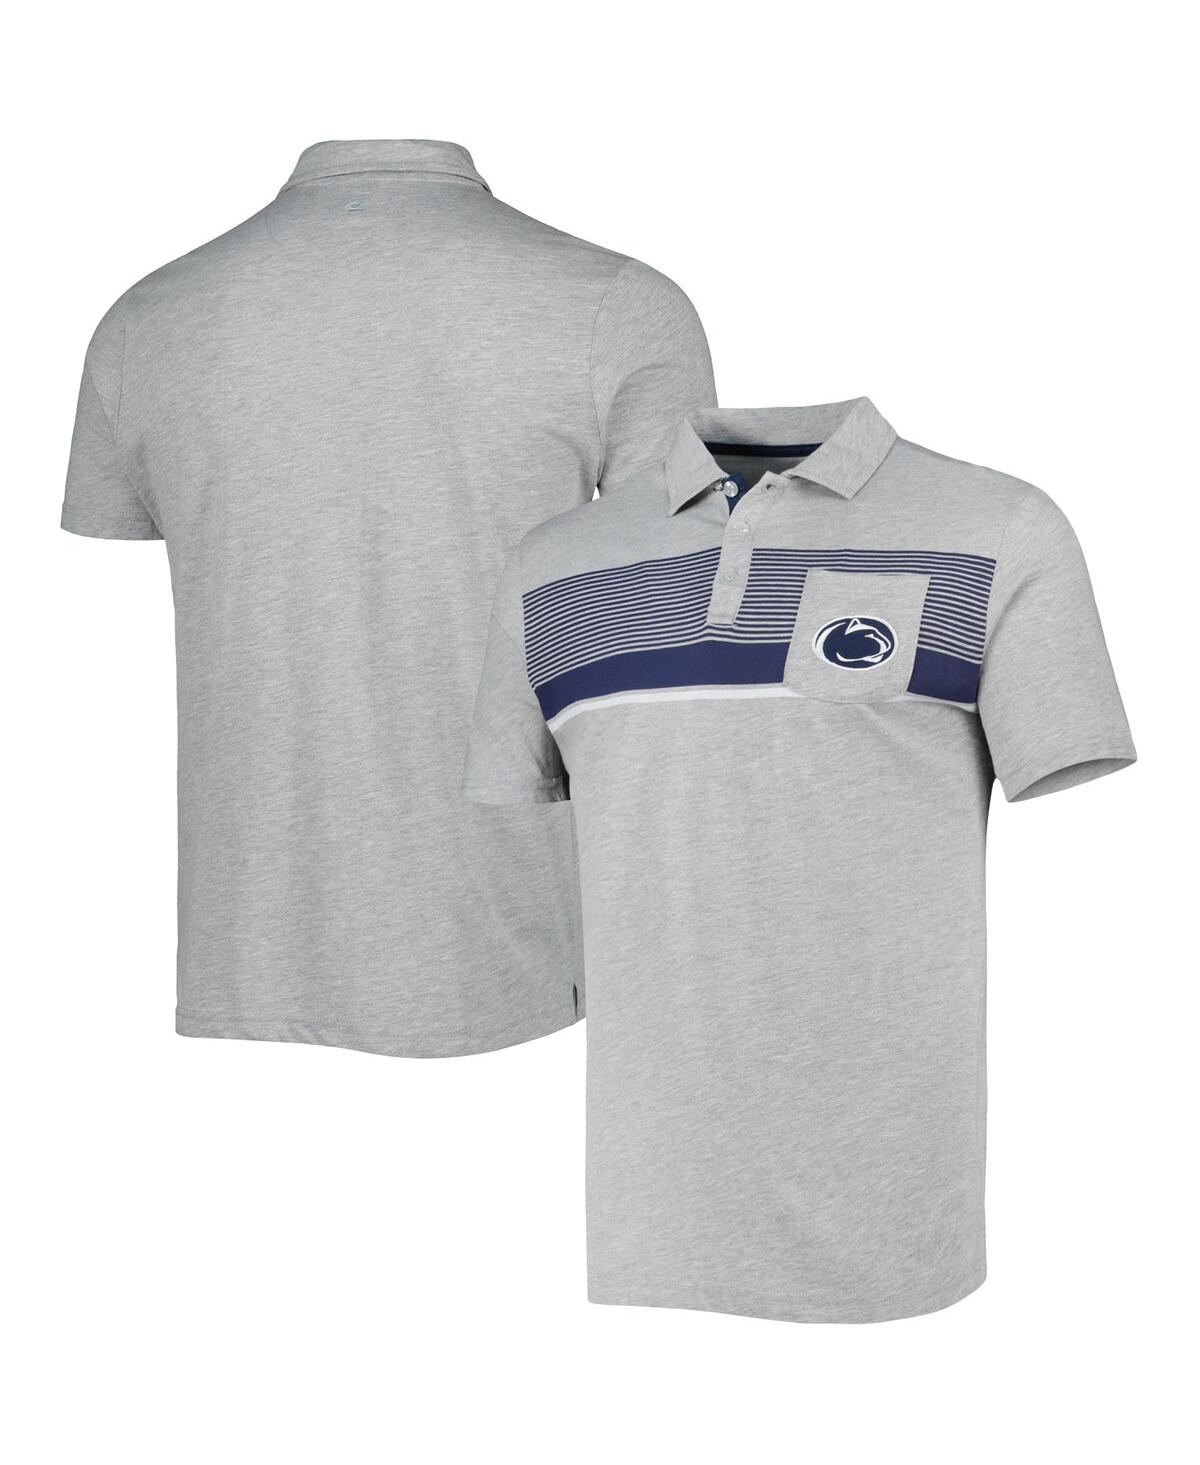 Men's Colosseum Heathered Gray Penn State Nittany Lions Golfer Pocket Polo Shirt - Heathered Gray